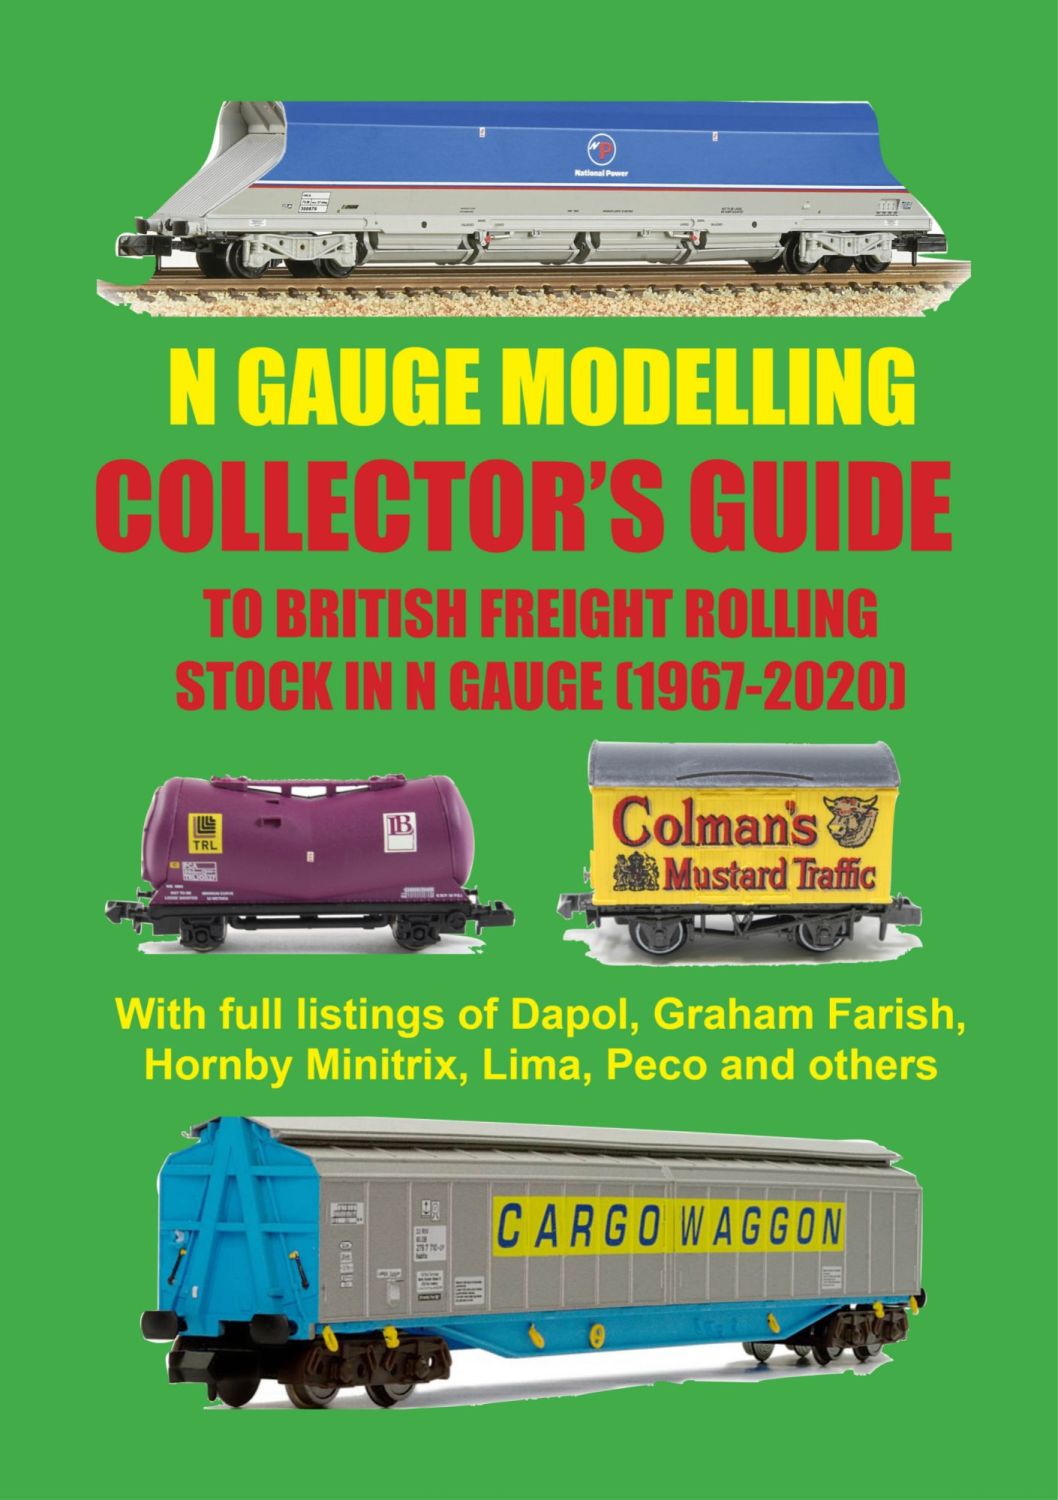 COLLECTOR'S GUIDE TO BRITISH FREIGHT ROLLING STOCK IN N GAUGE (1968-2020)